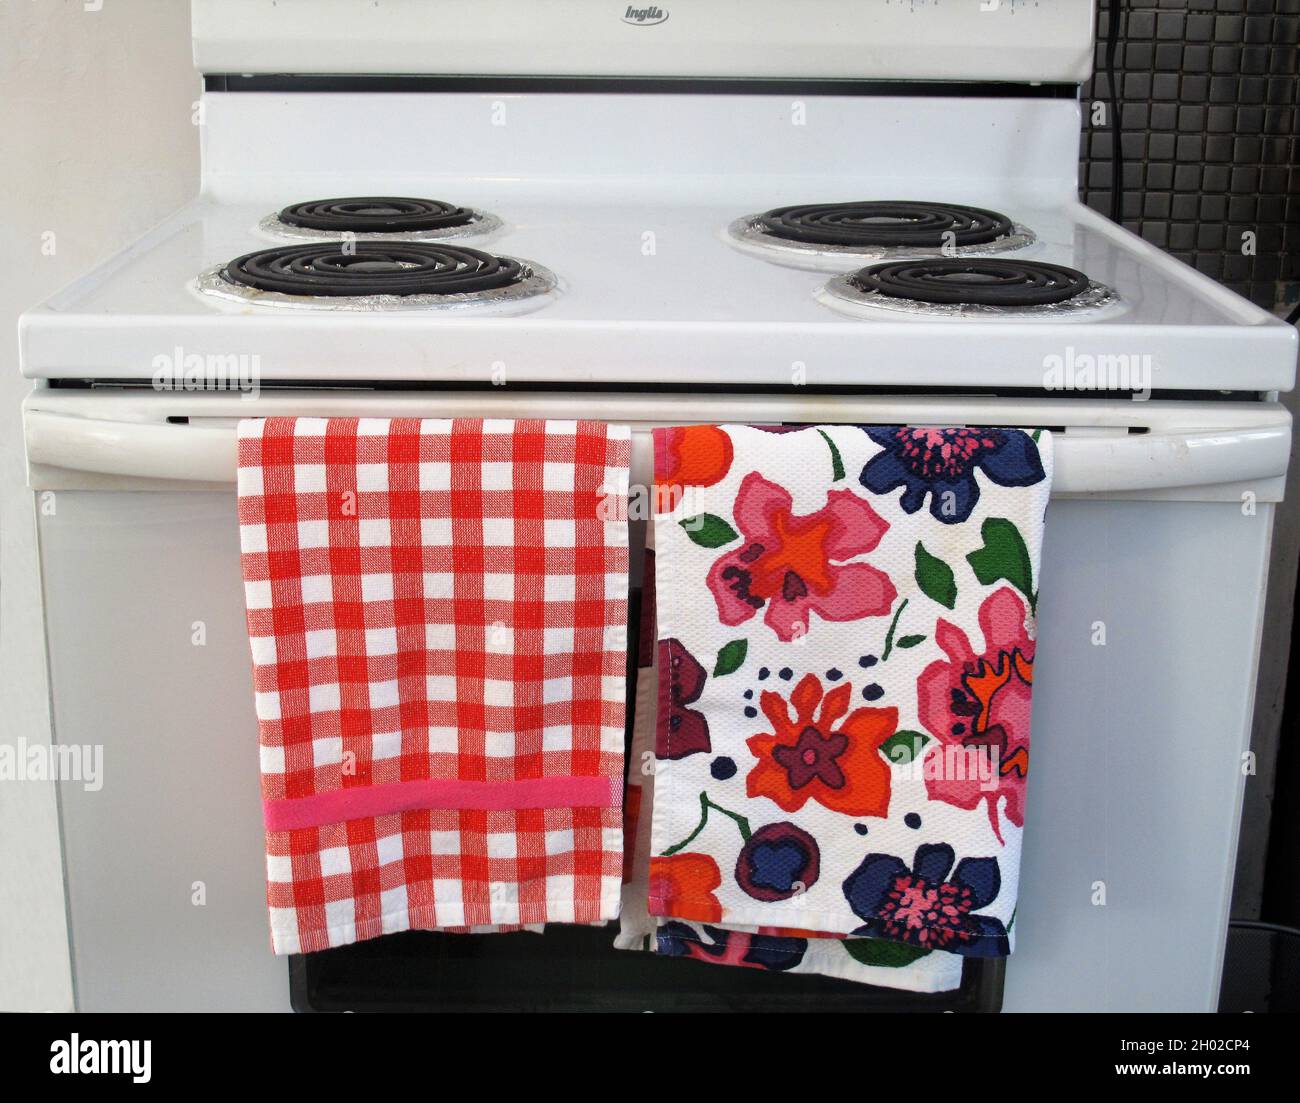 White stove with coorful dish towels Stock Photo